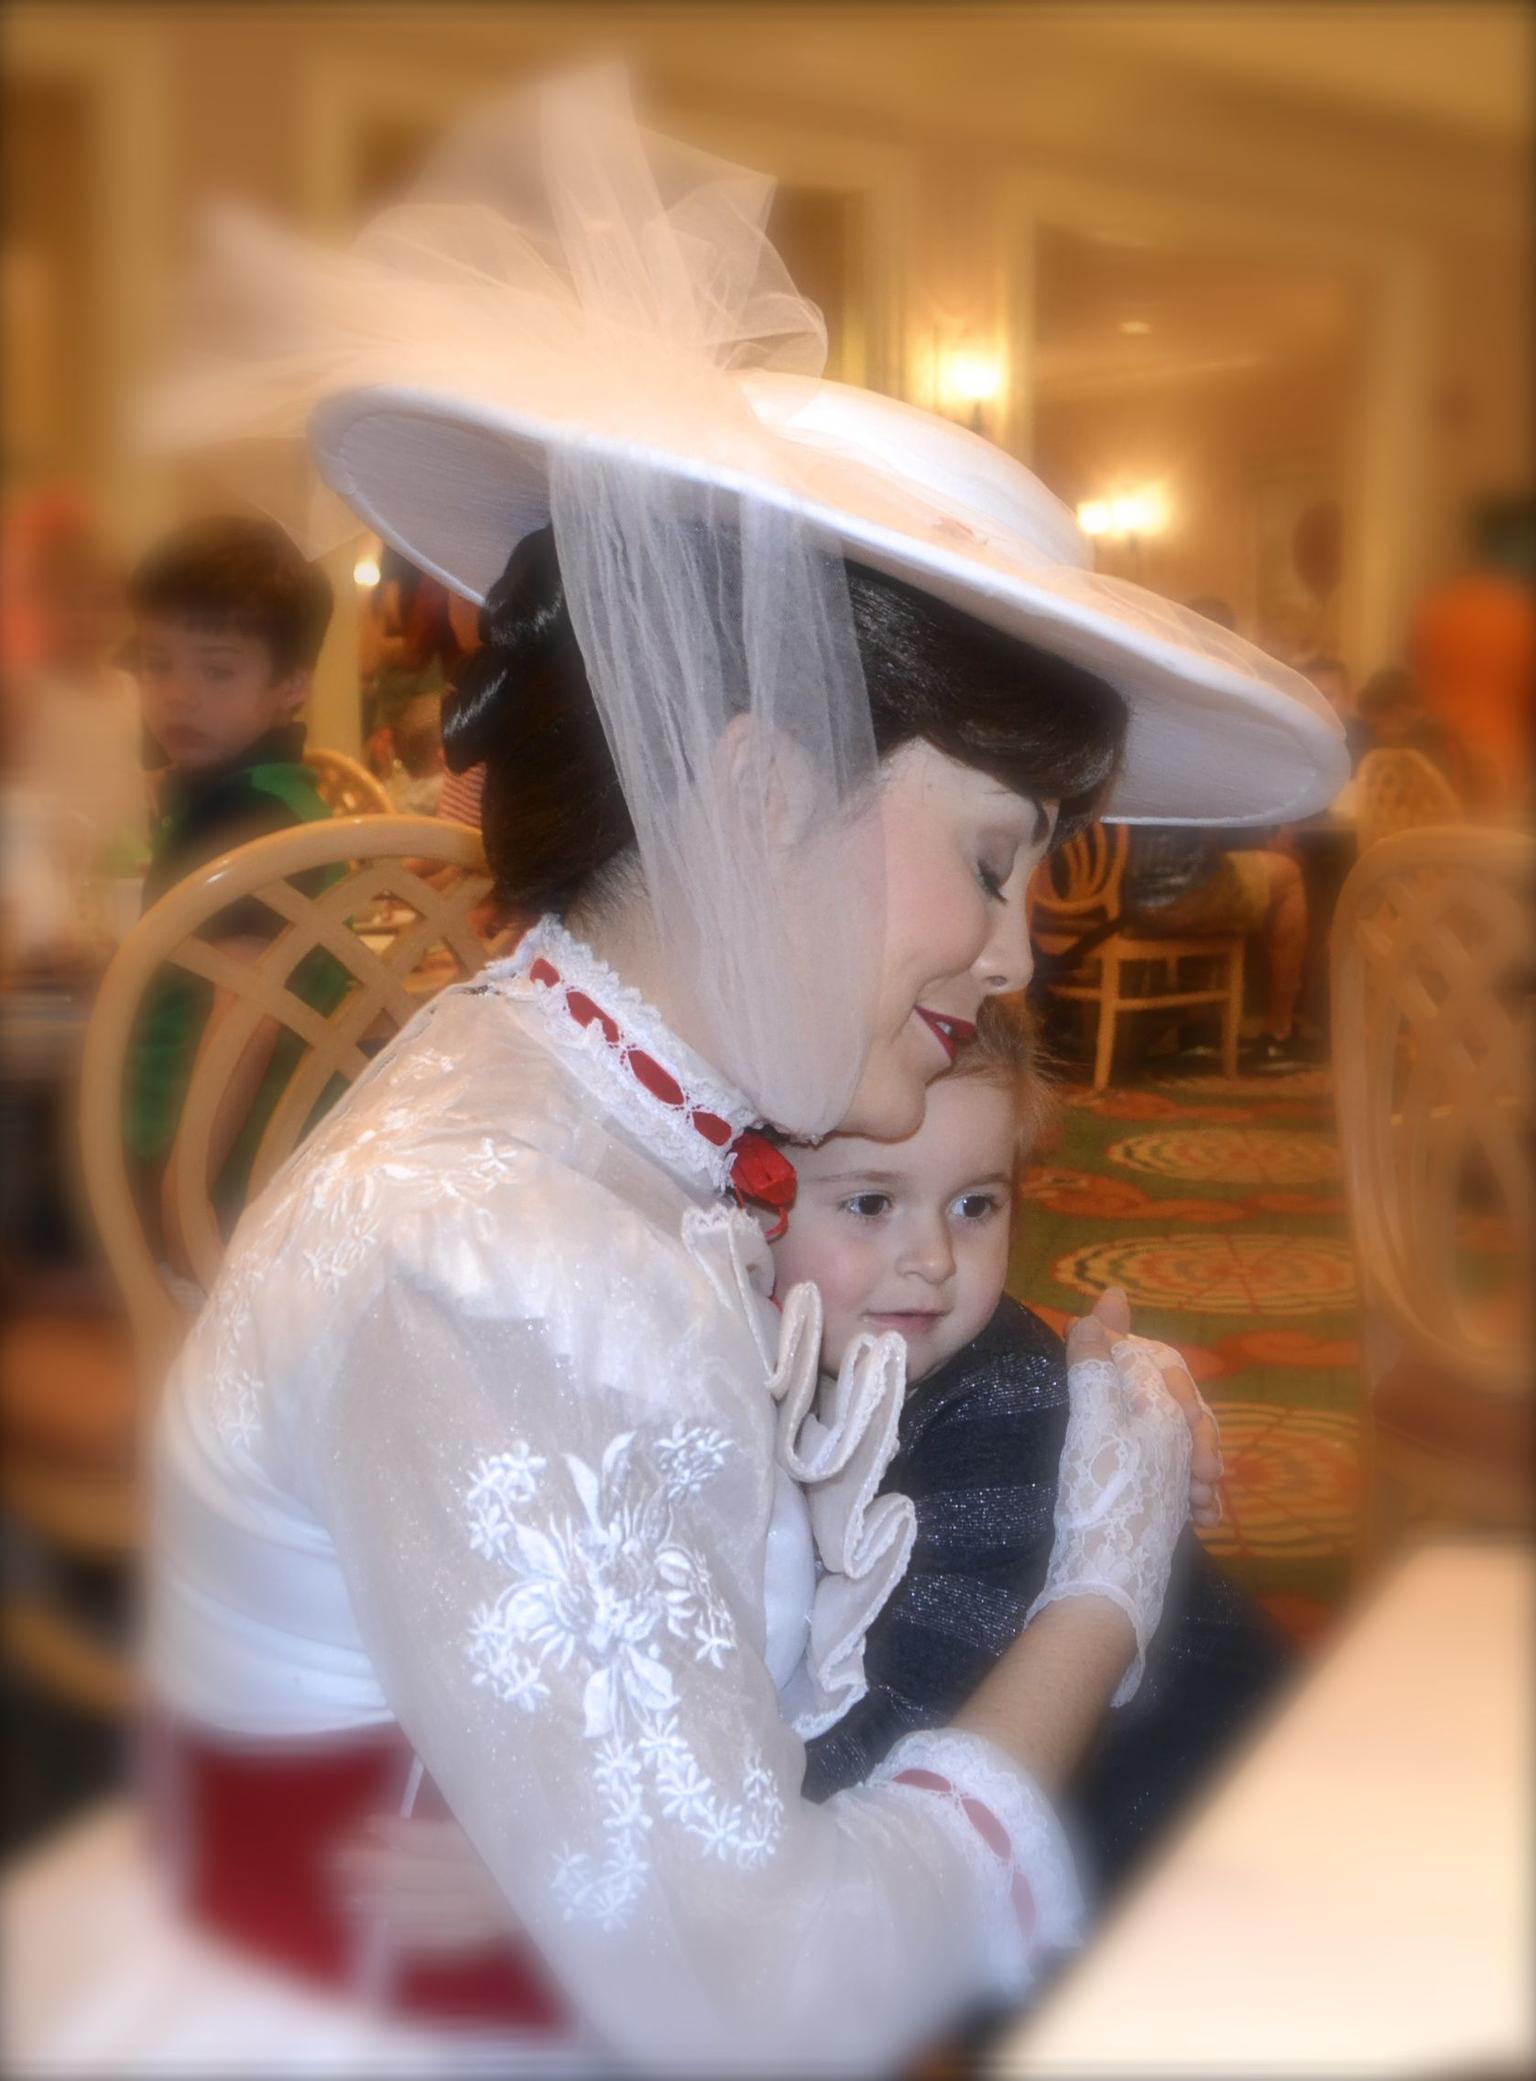 Mary Poppins giving our Princess a hug